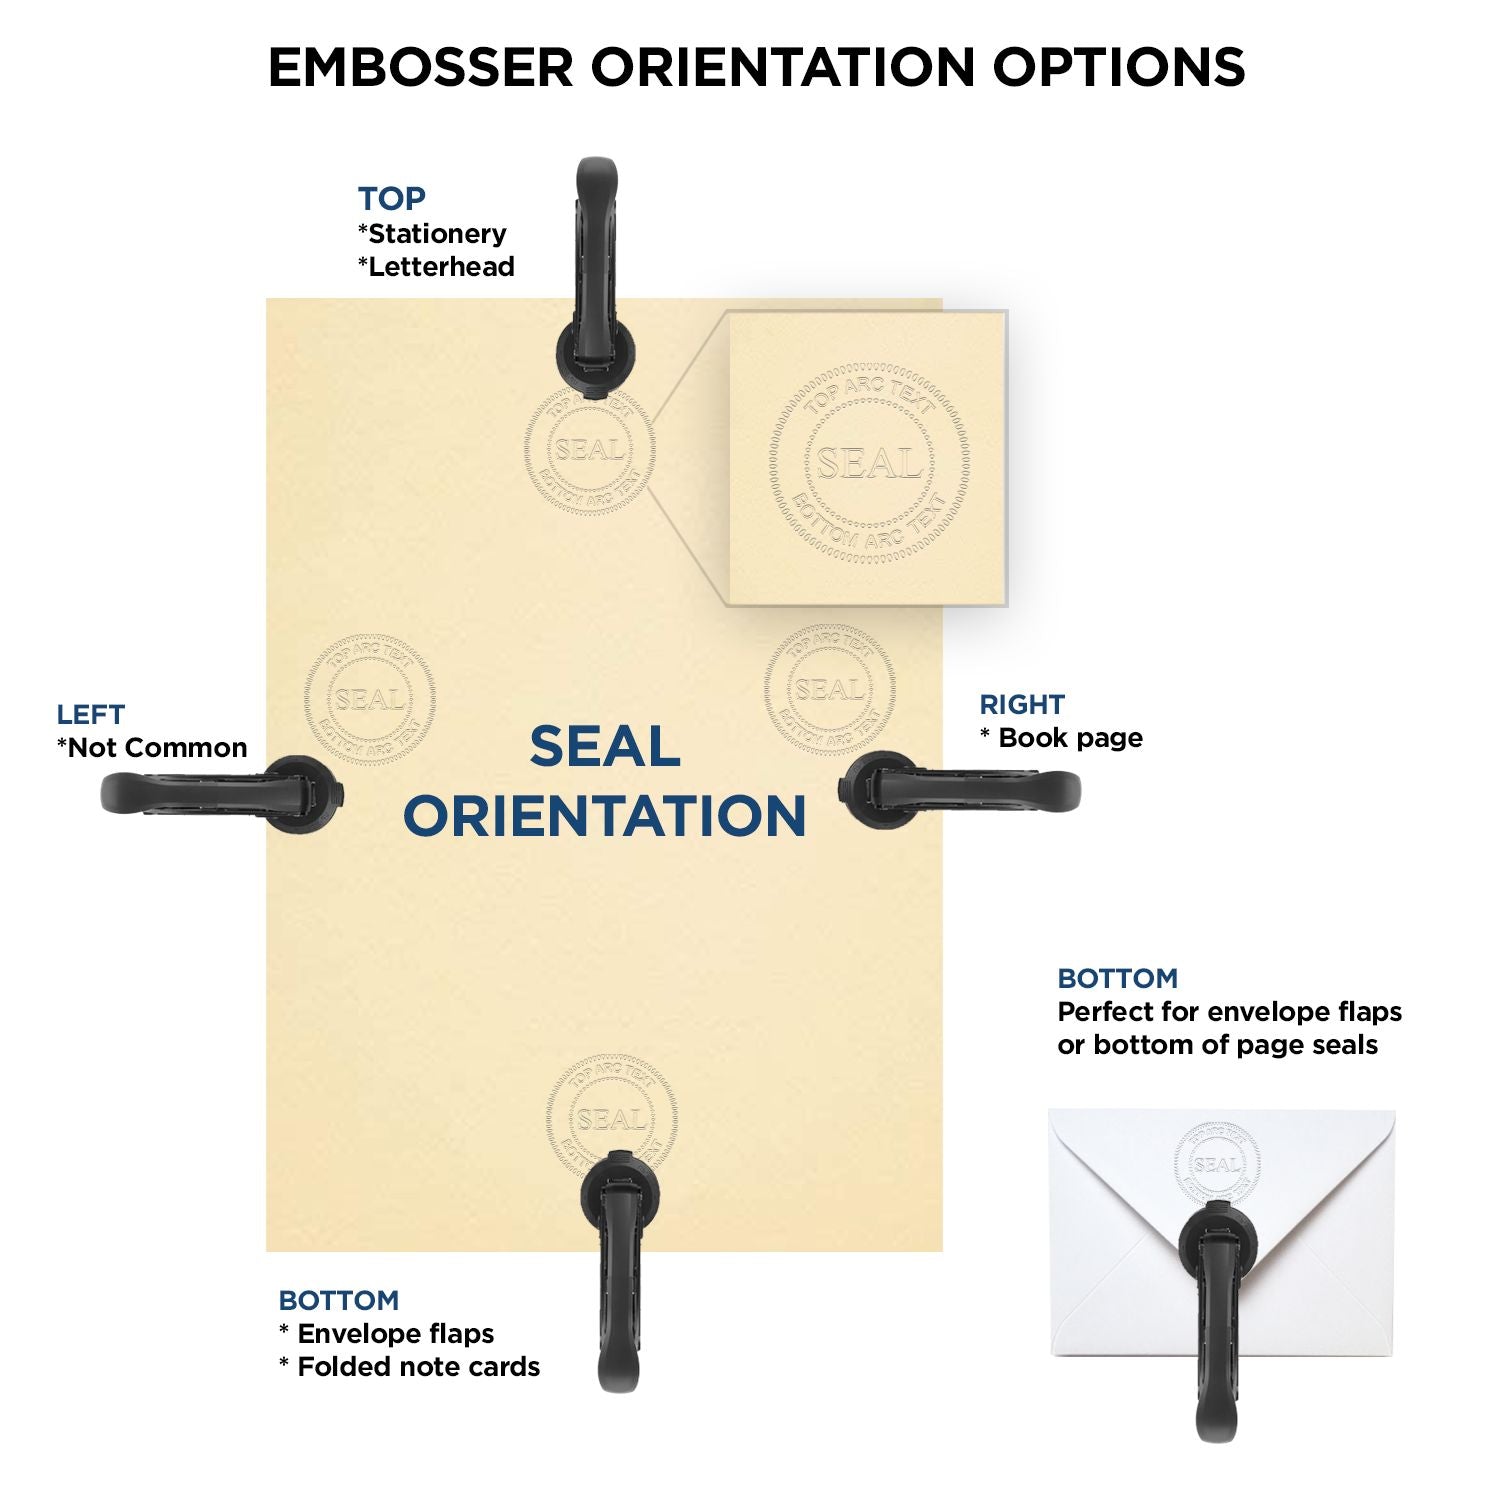 An infographic for the State of Colorado Extended Long Reach Engineer Seal showing embosser orientation, this is showing examples of a top, bottom, right and left insert.